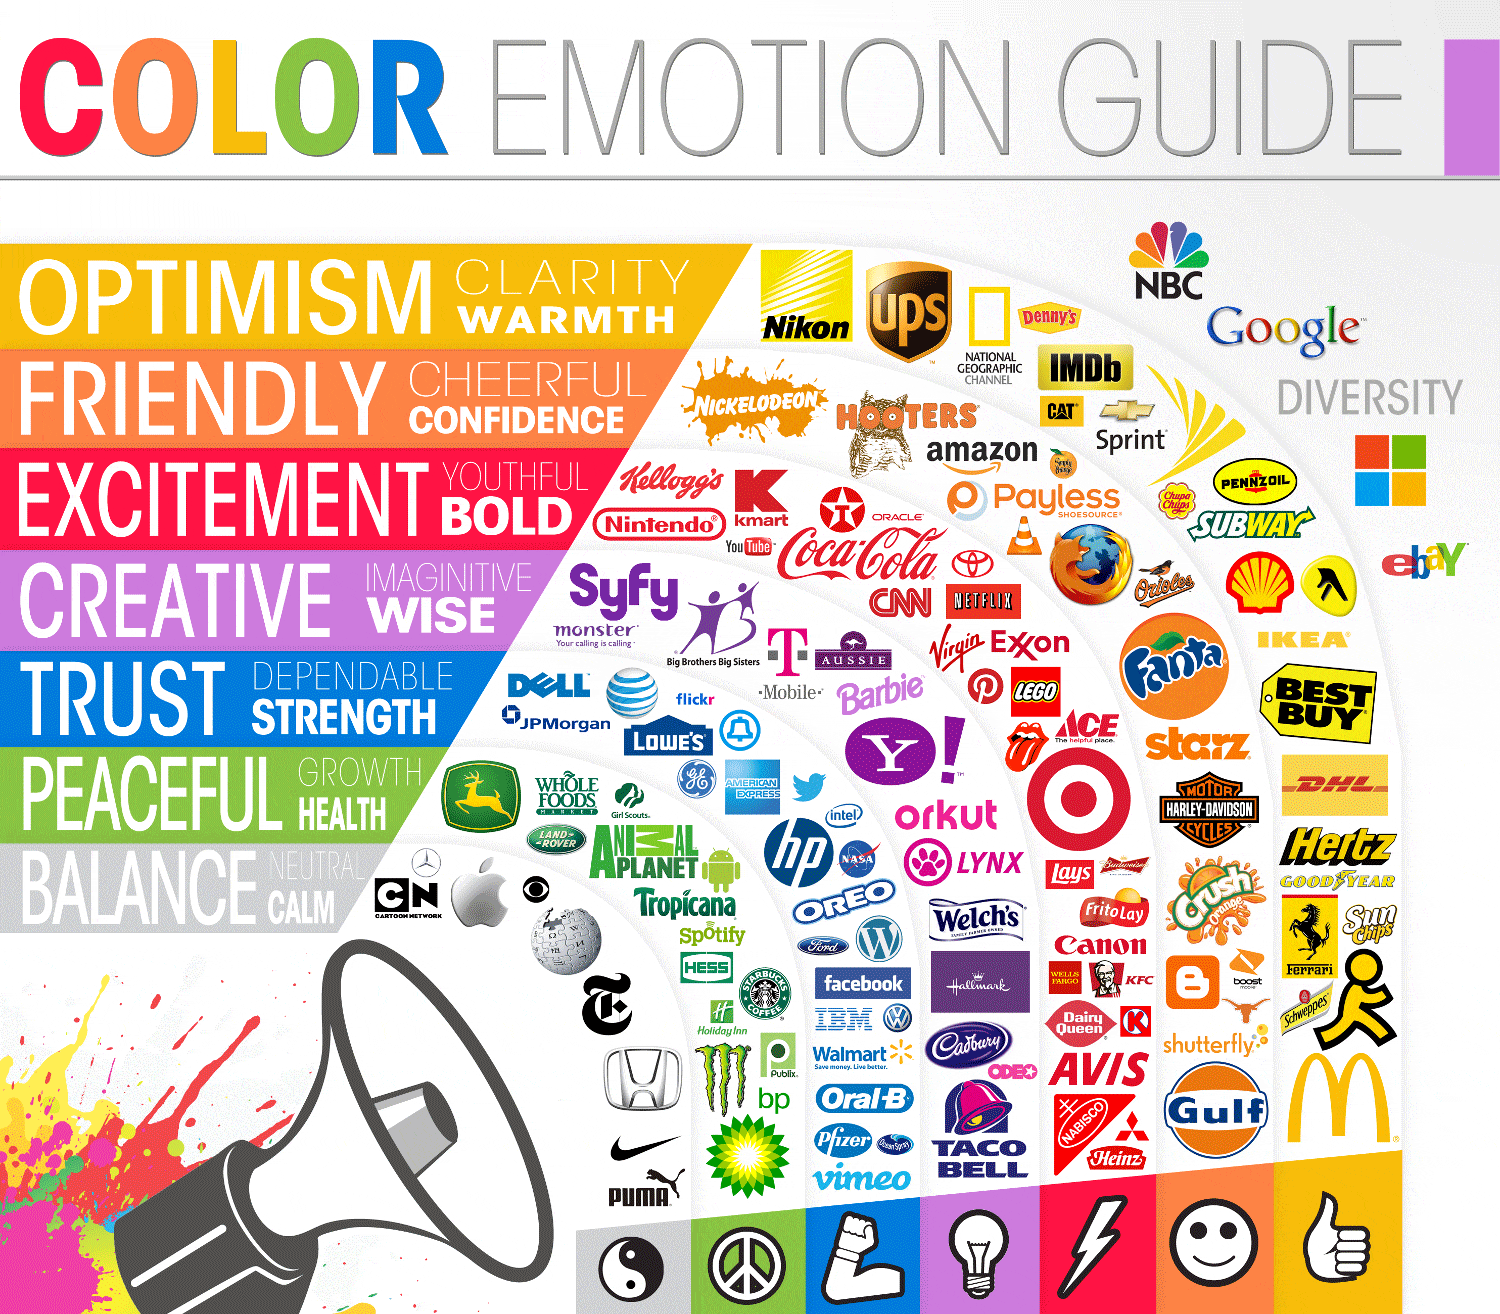 Guide to color emotions